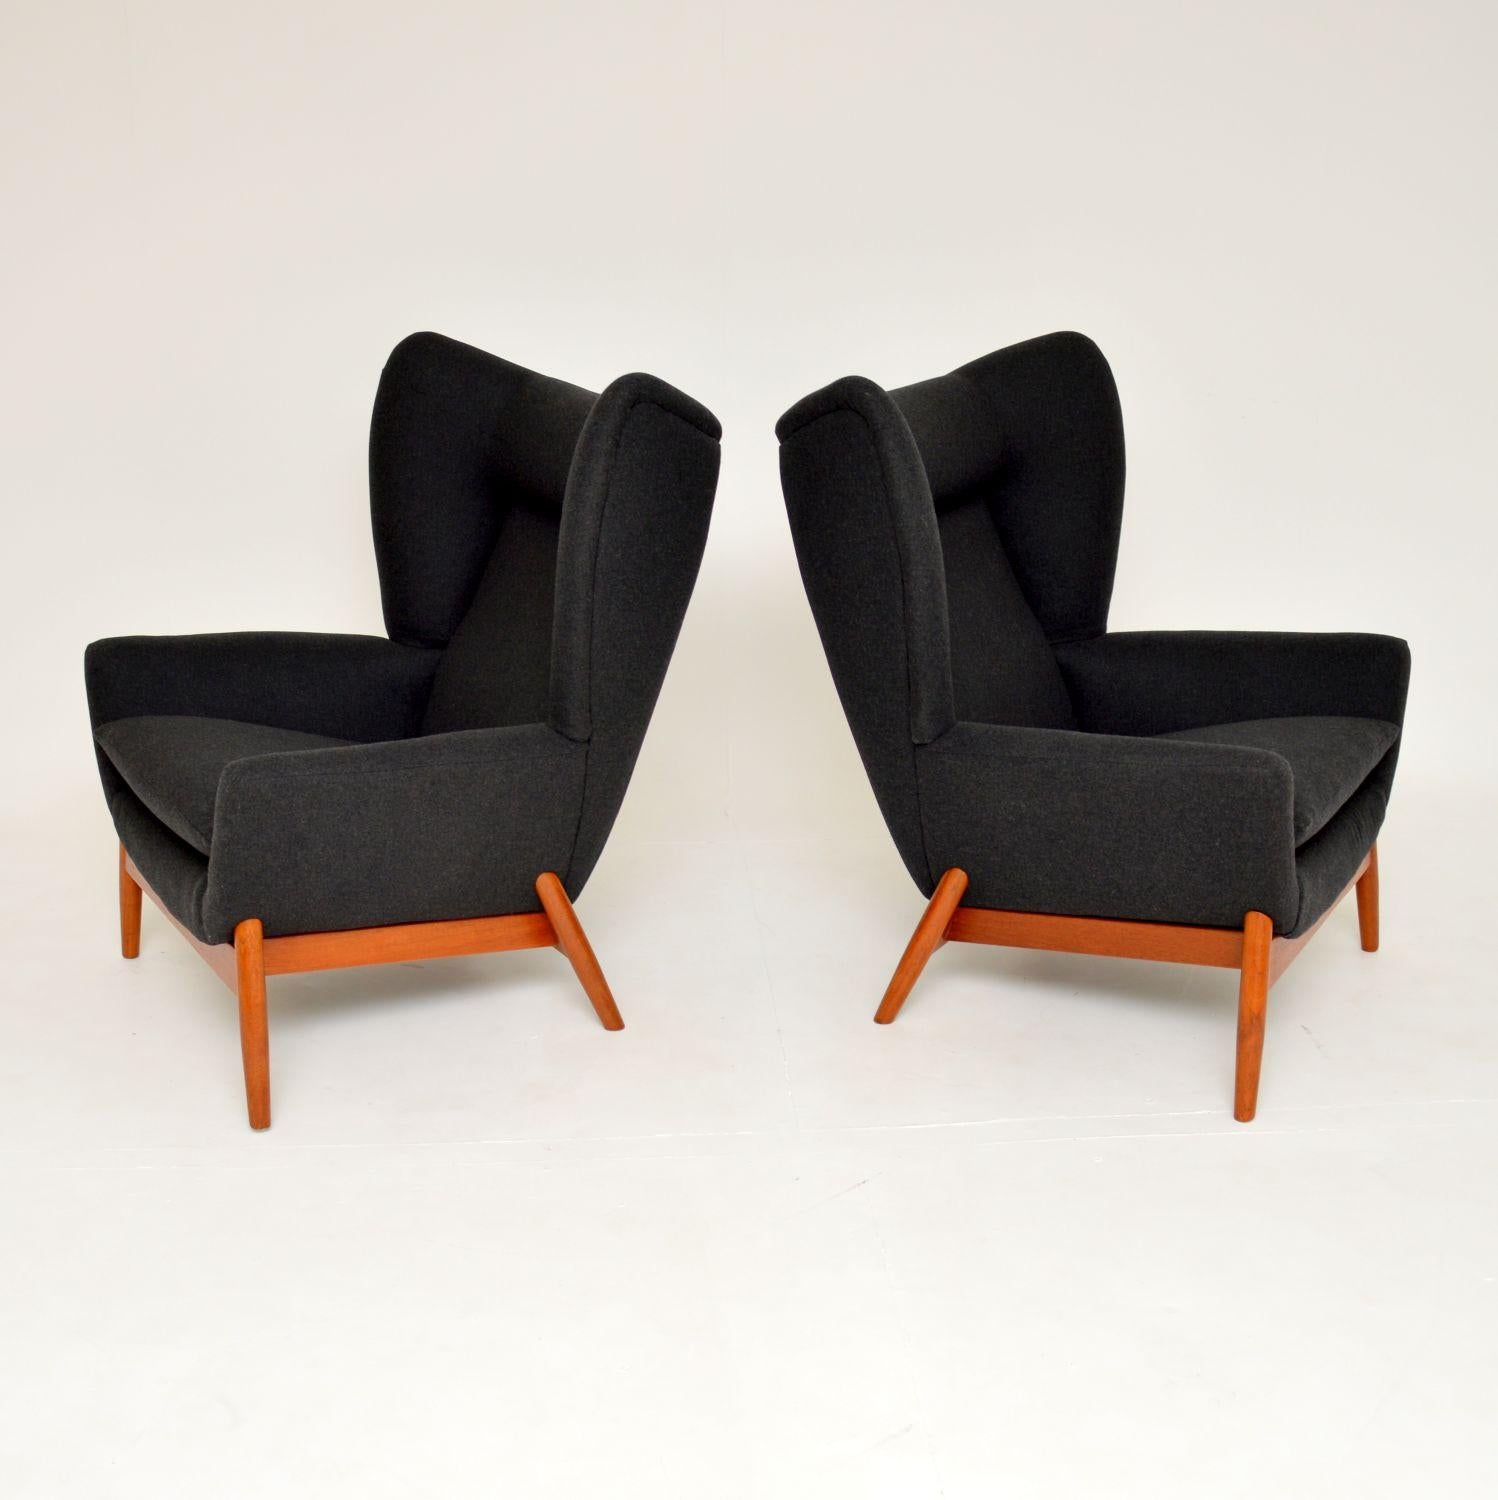 English 1960's Pair of Parker Knoll 'Merrywood' Armchairs